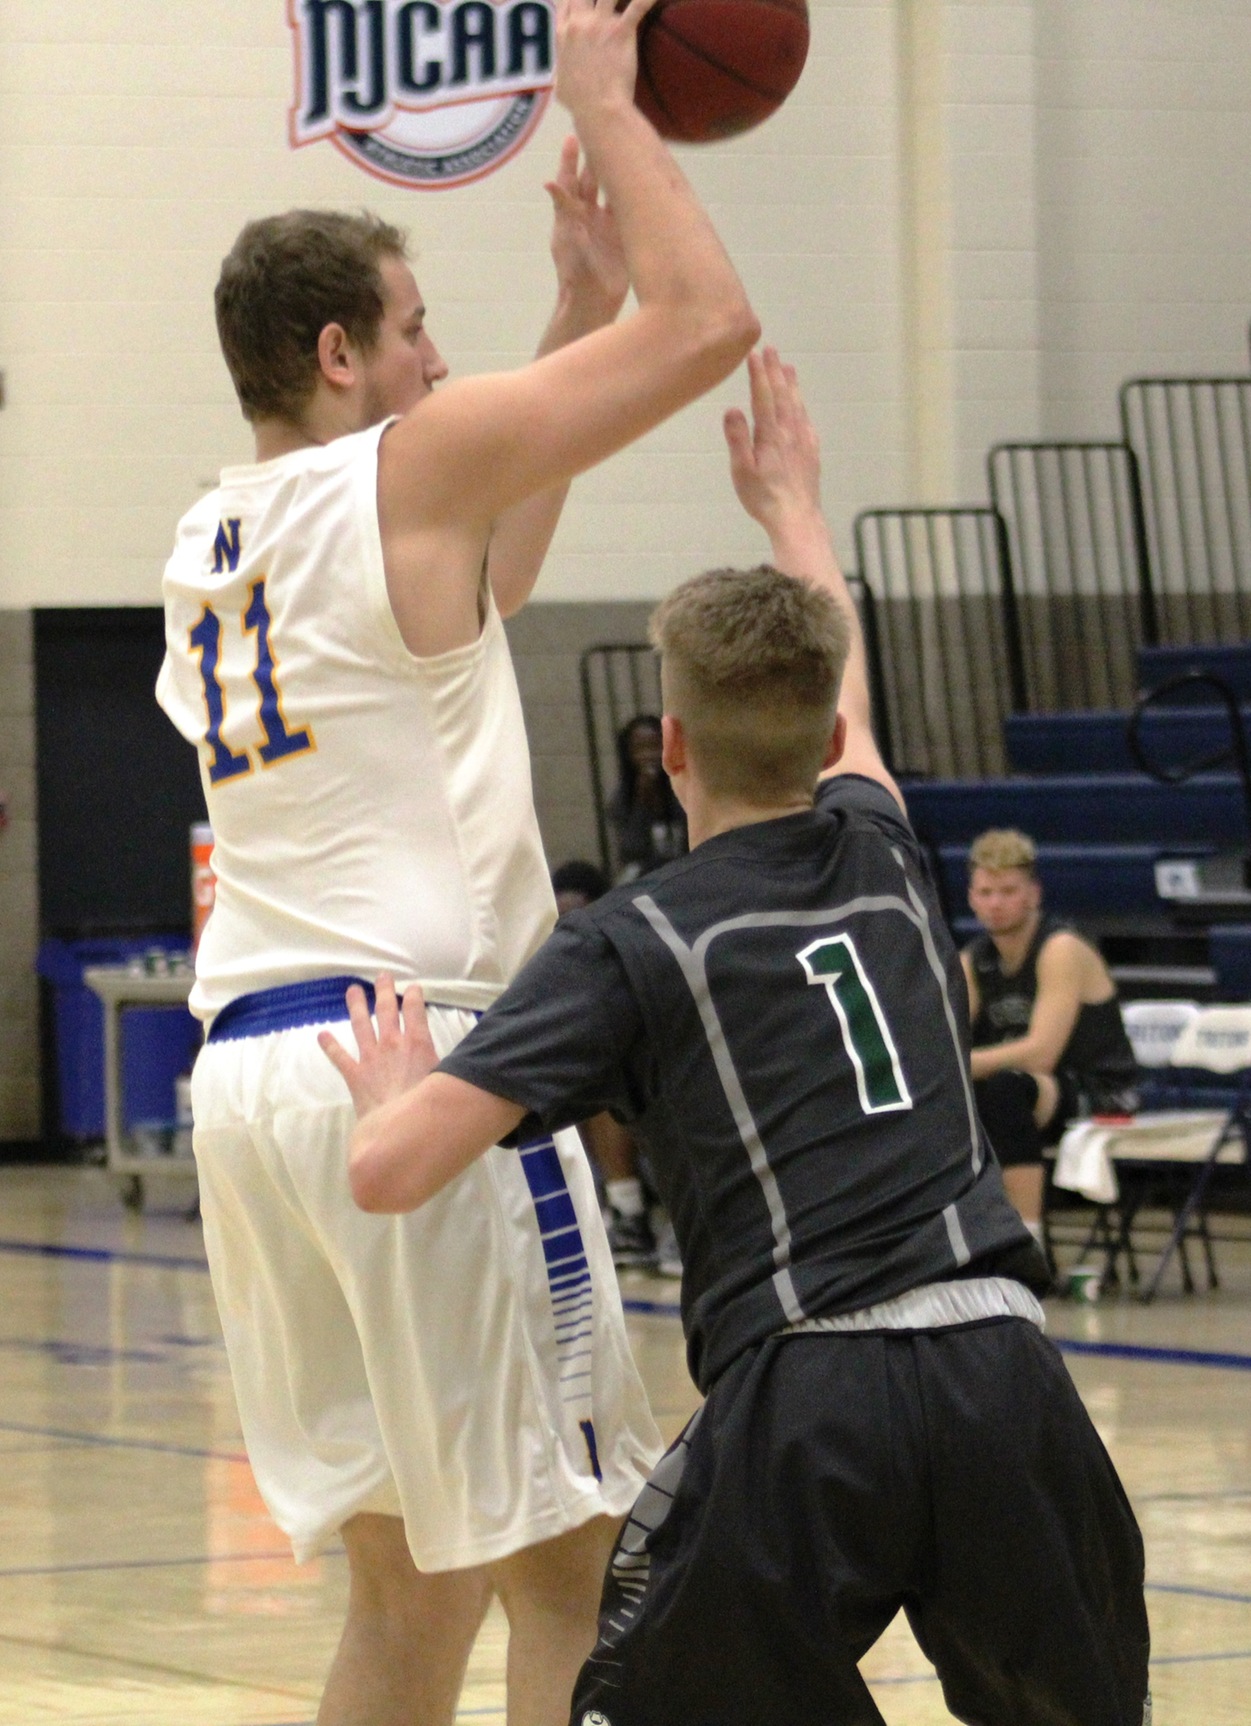 NIACC's Jaycob Payne passes the ball against Central CC on Dec. 2 in Fort Dodge.